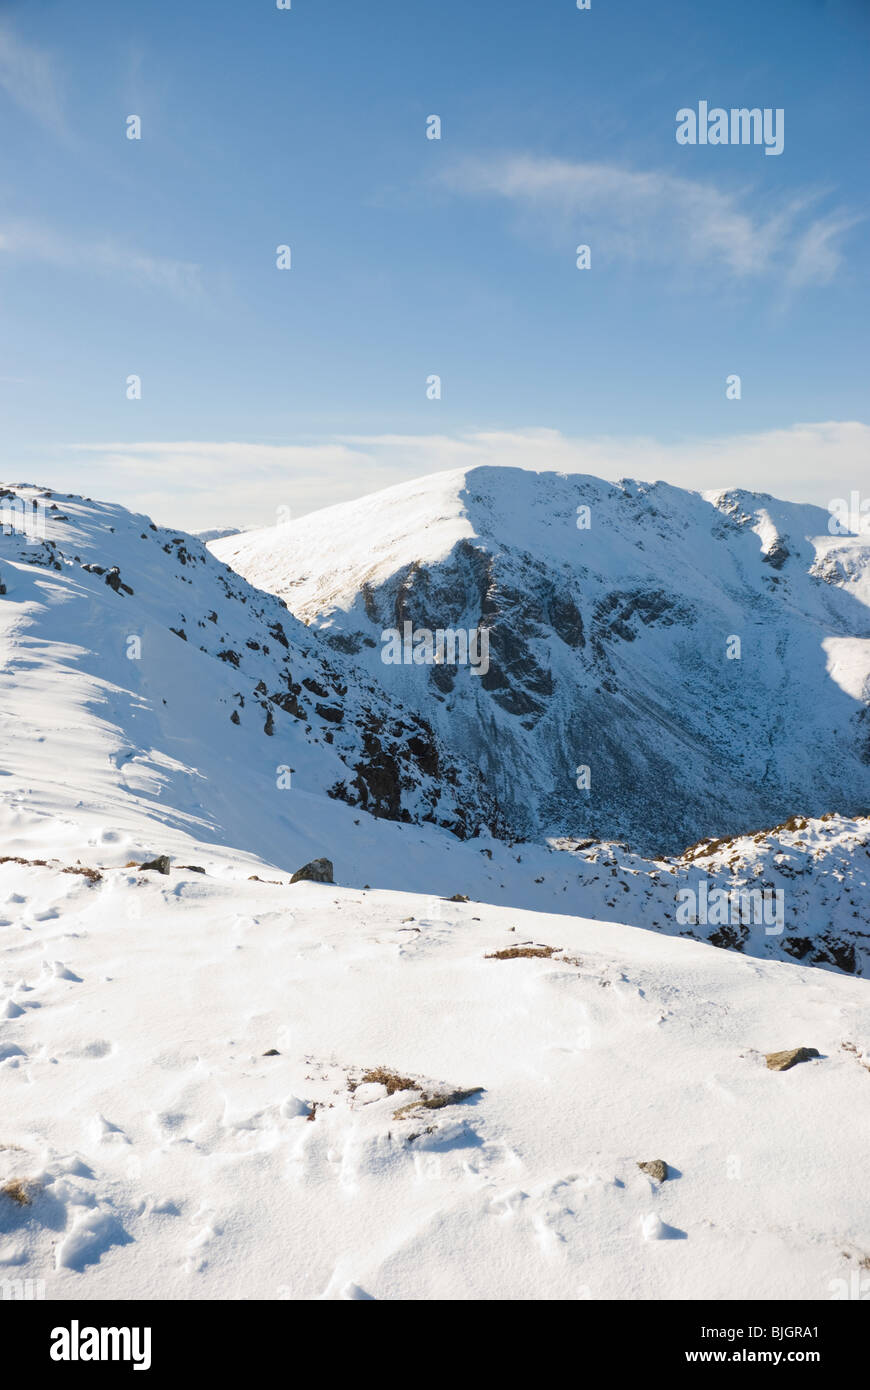 Snow covered Cumbrian mountains in winter Stock Photo